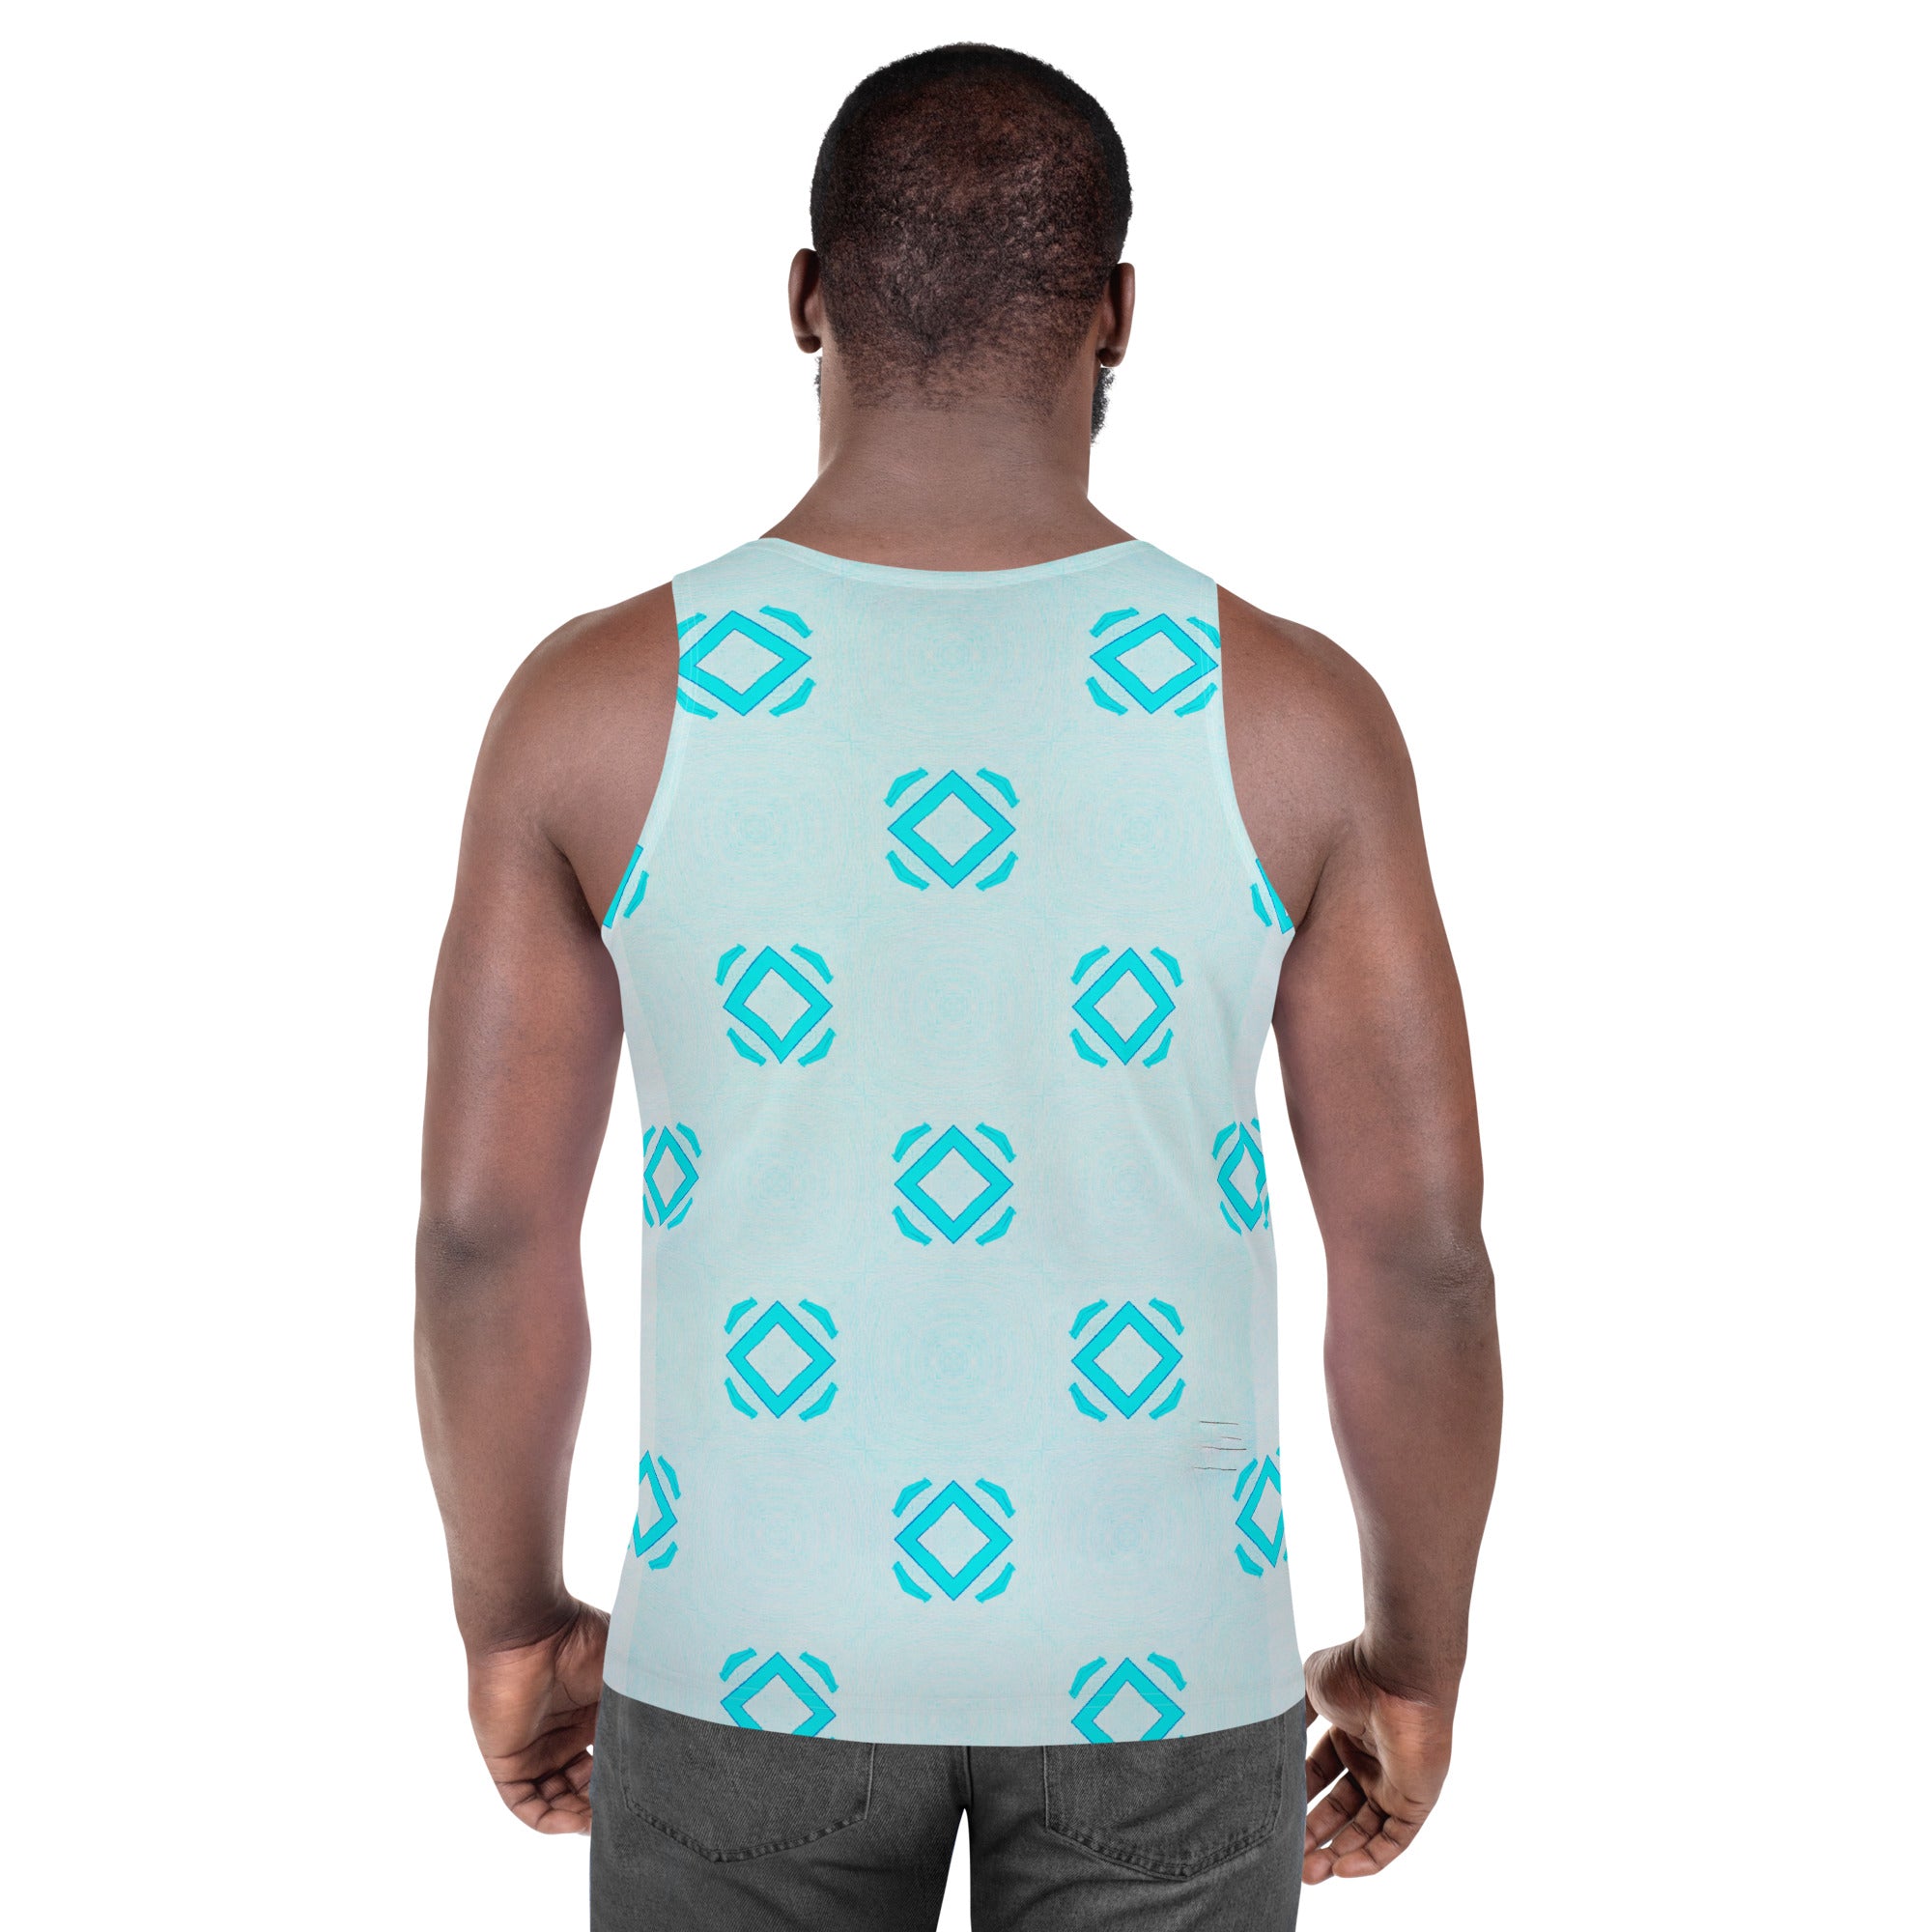 Men's Tank Top with Floral Design - Back View